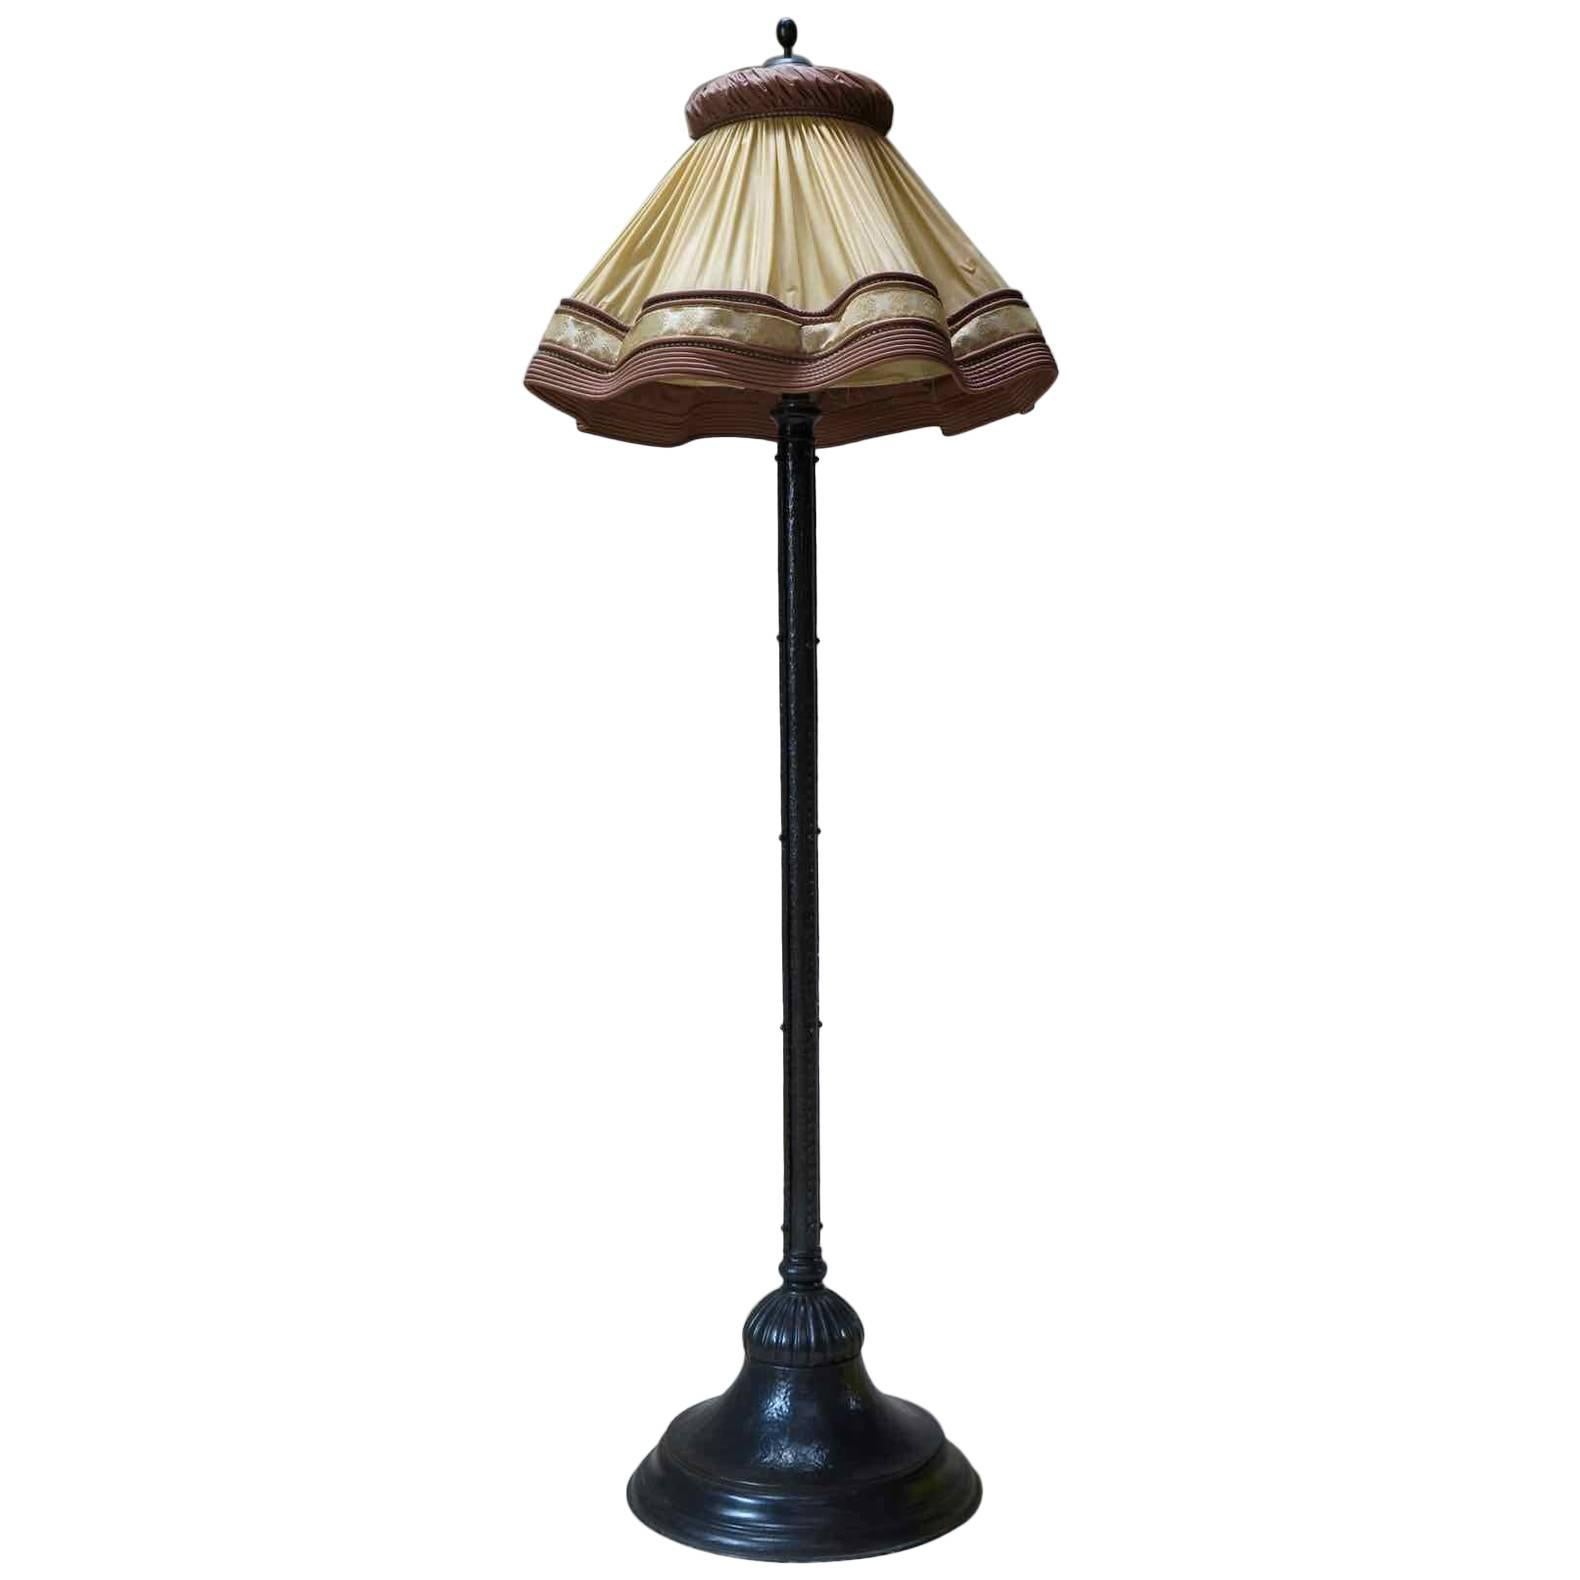 1930s Hammered Iron Floor Lamp with Large Plastic Shade